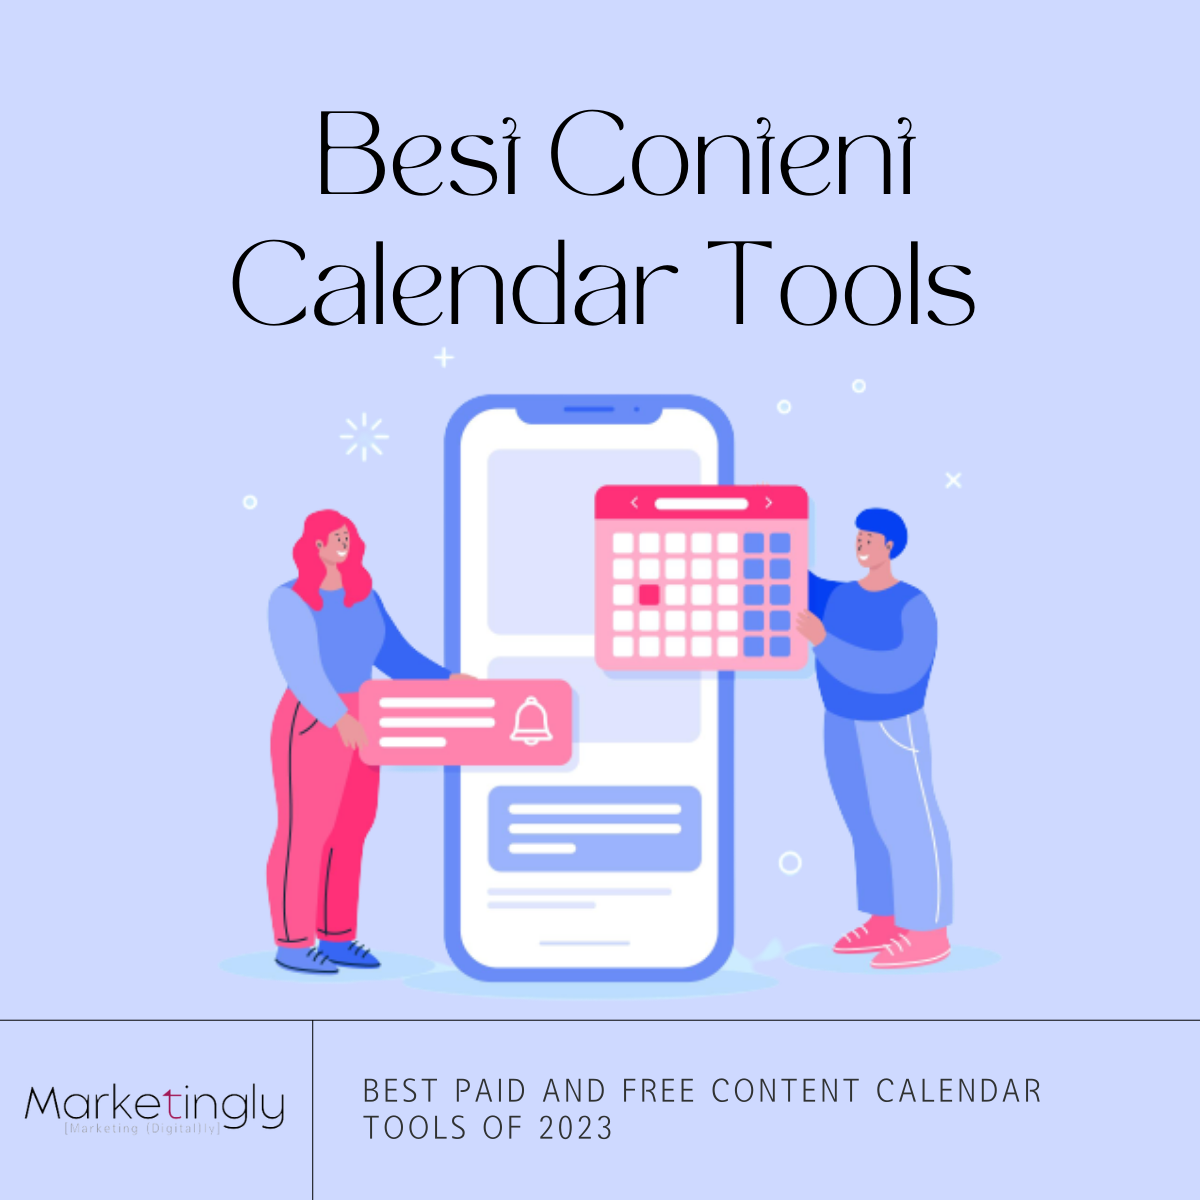 The Best Content Calendar Tools (Paid and Free) 2023